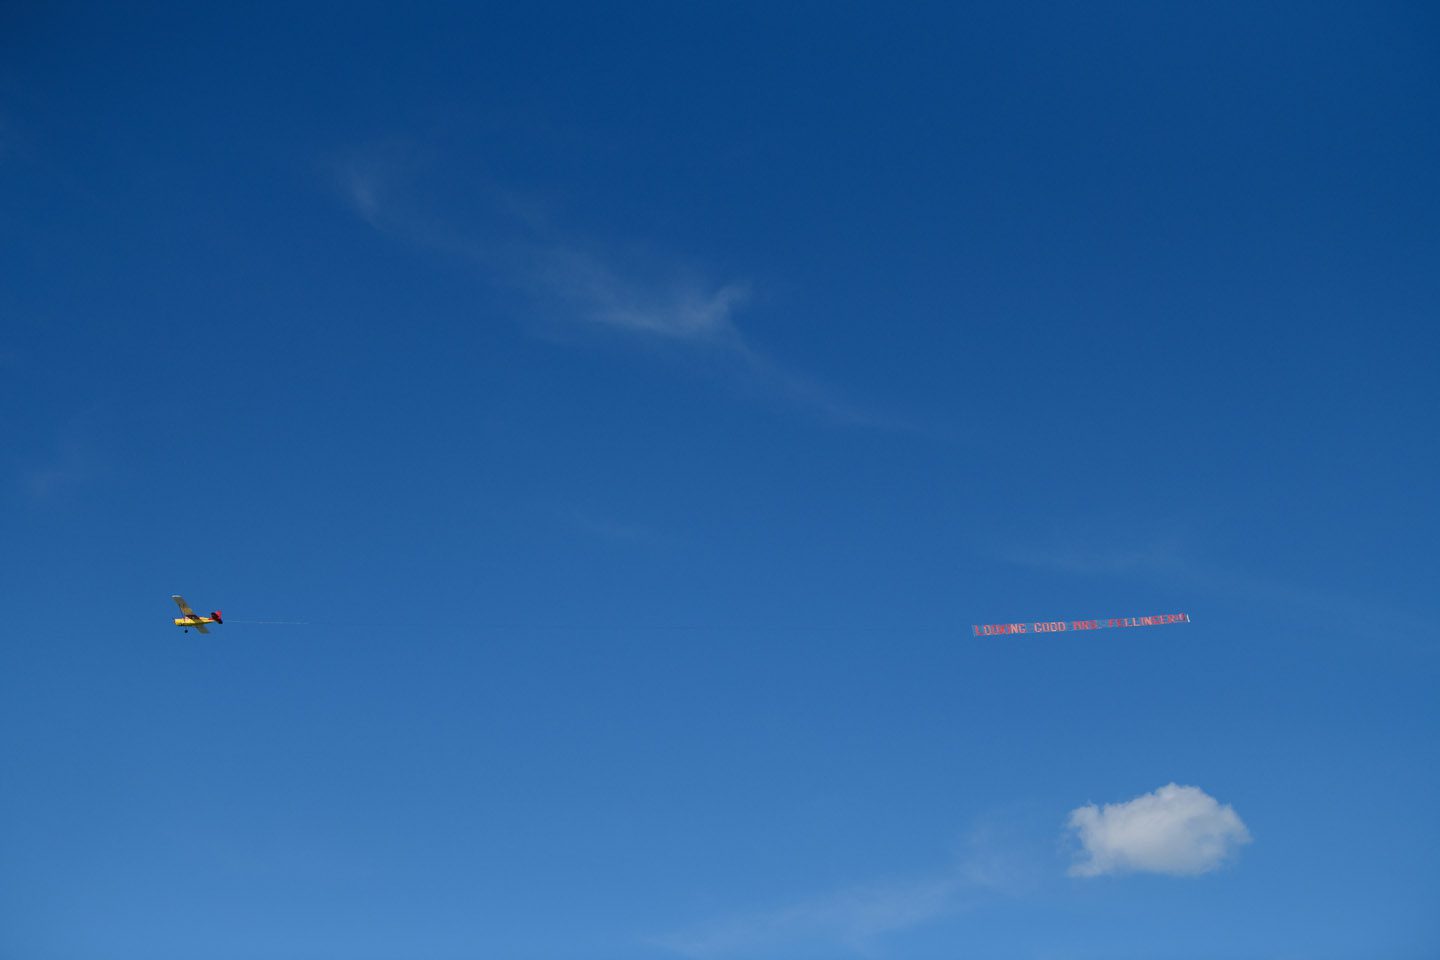 Outer Banks wedding airplane banner announcement